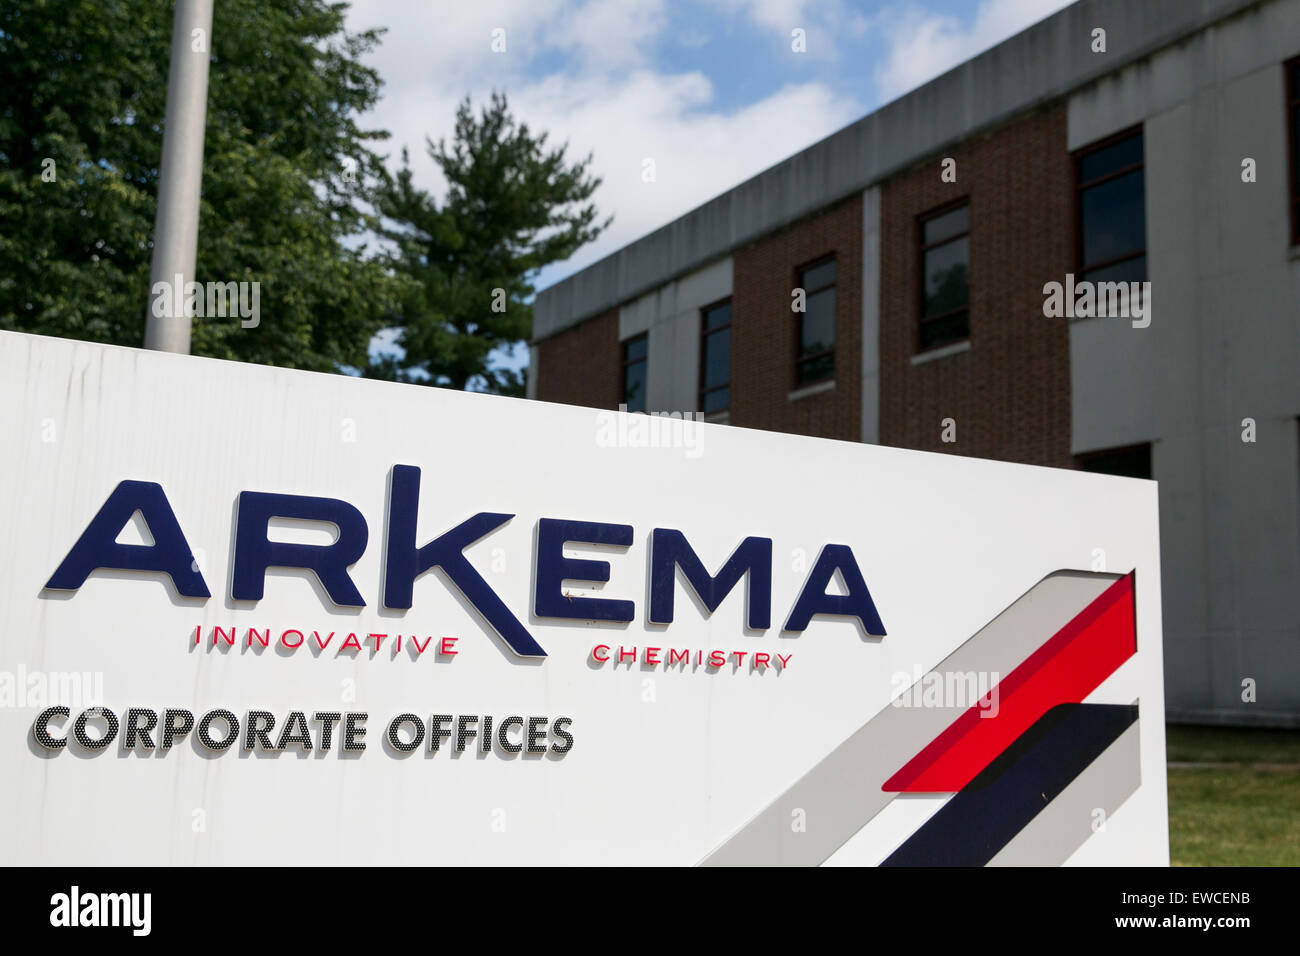 Contact details for Arkema's Research Center in the U.S.